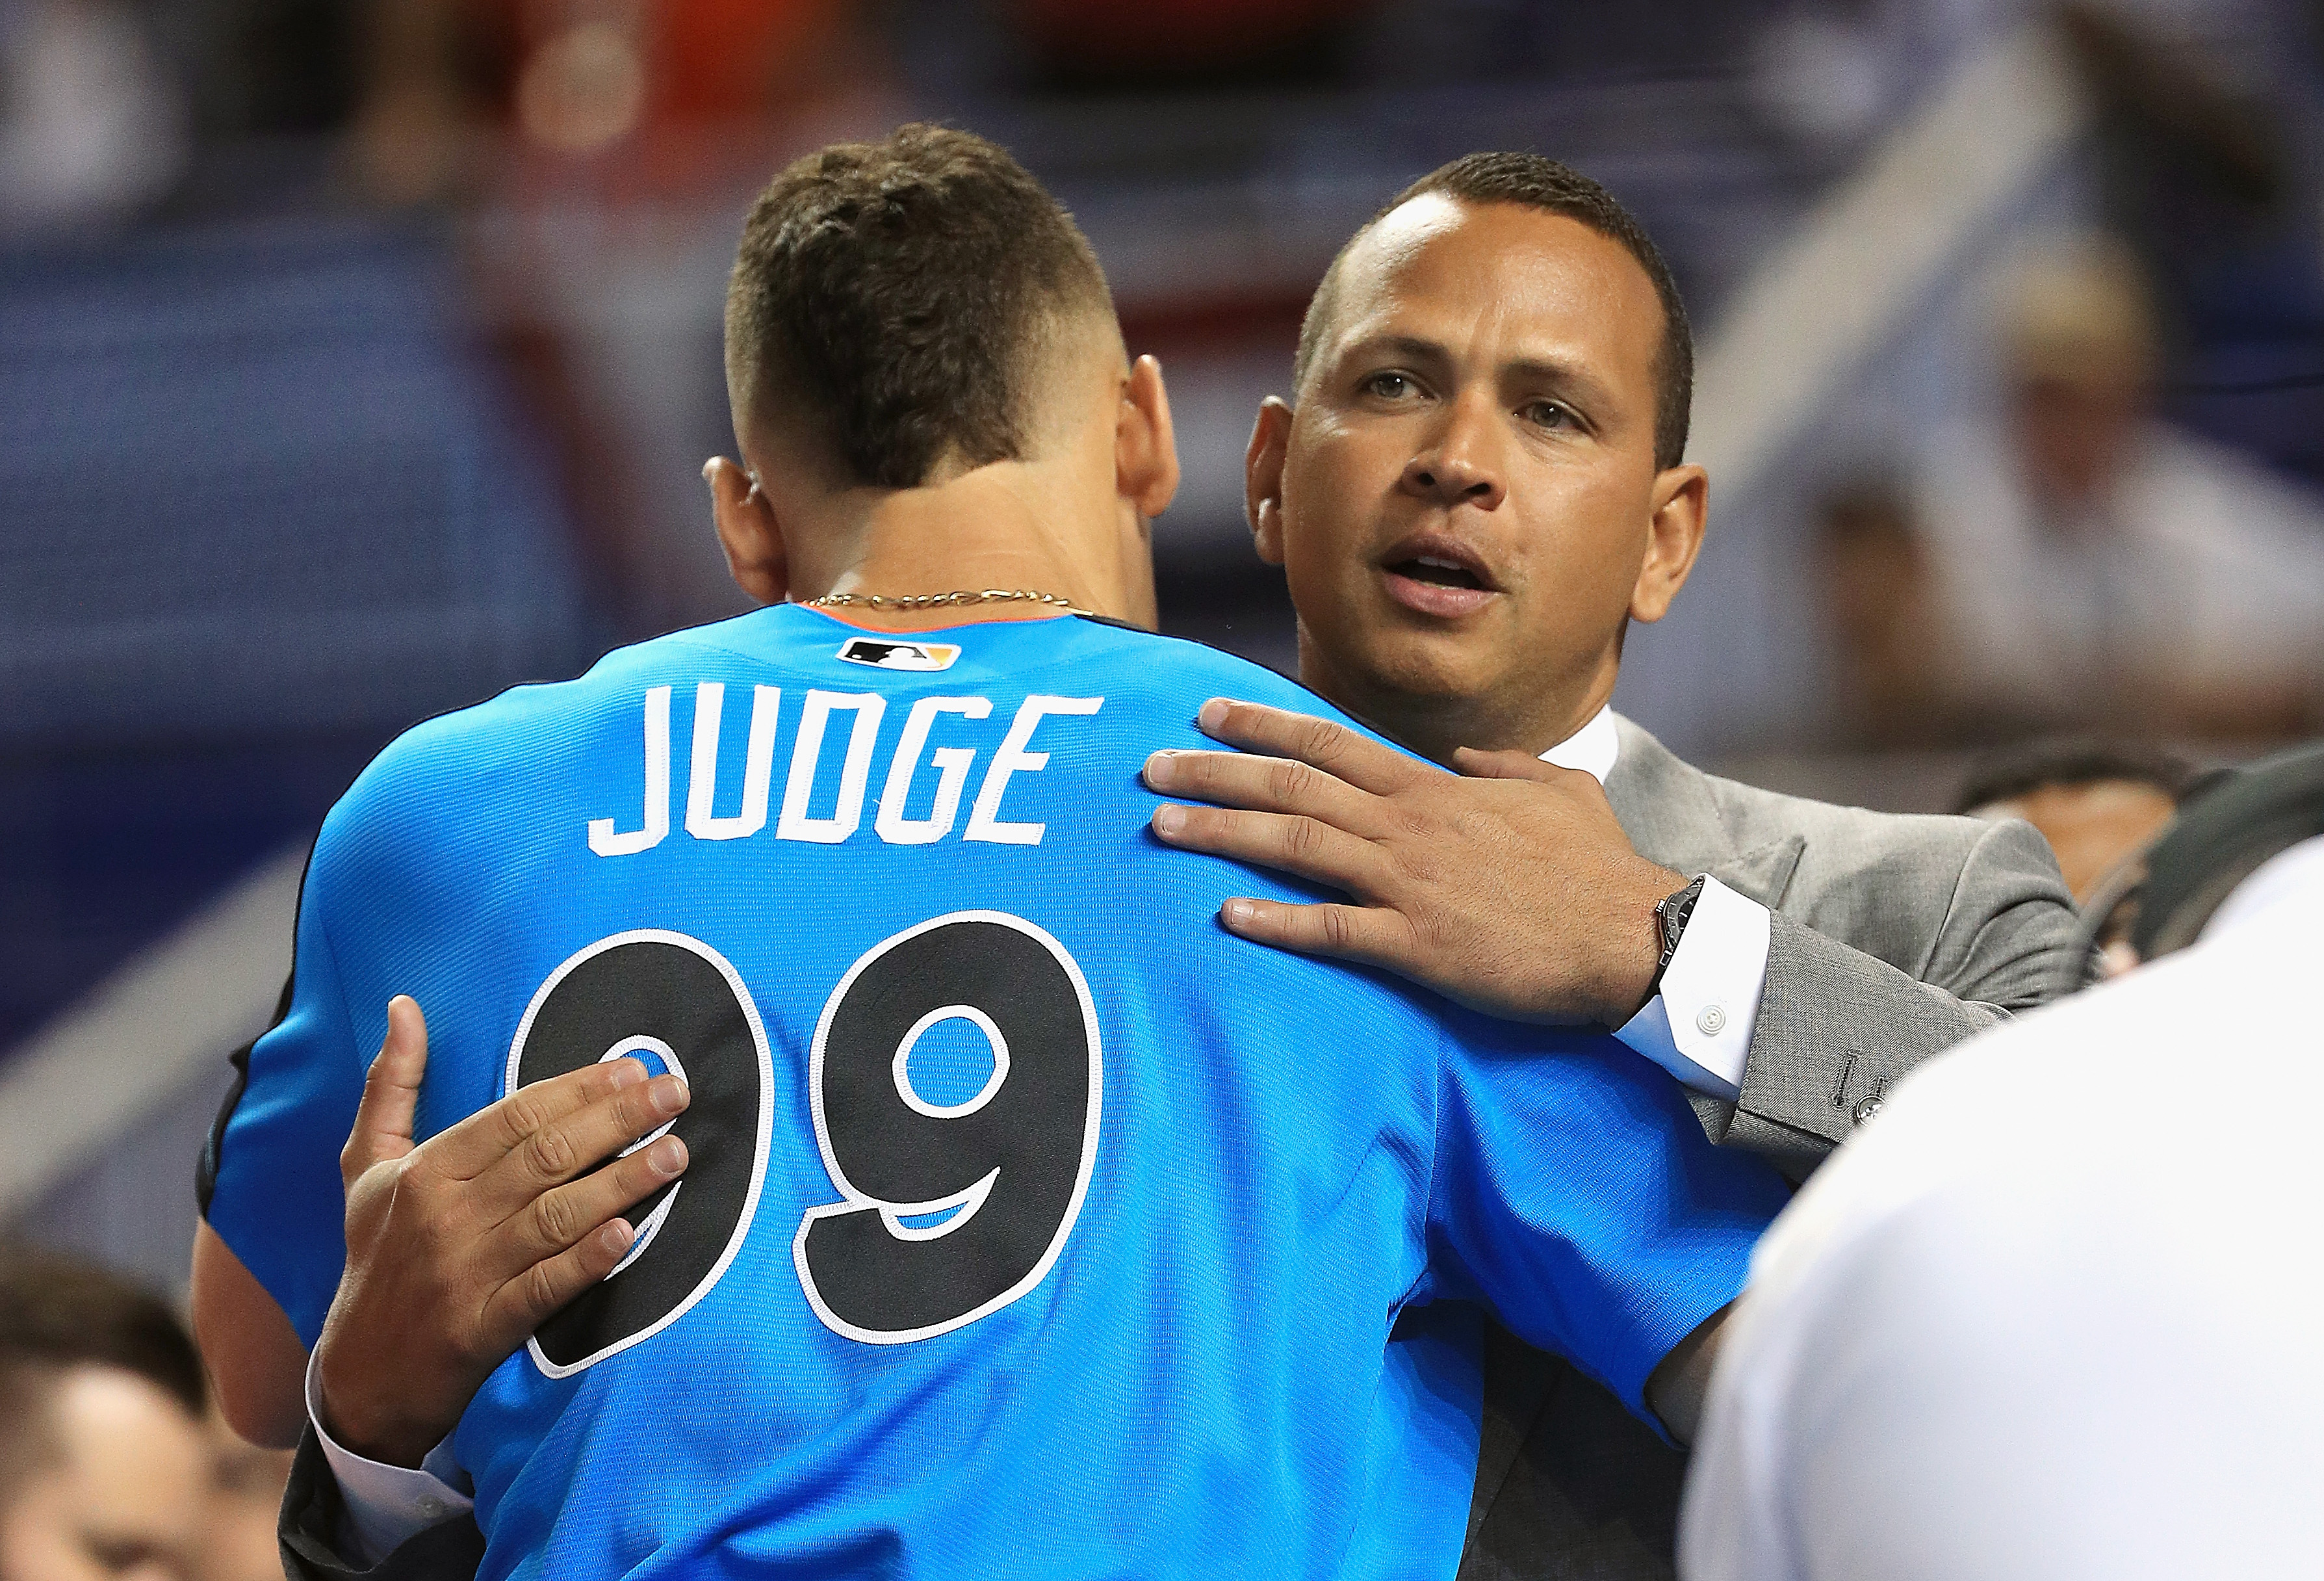 Yankees Alex Rodriguez and Derek Jeter are exchanging places in